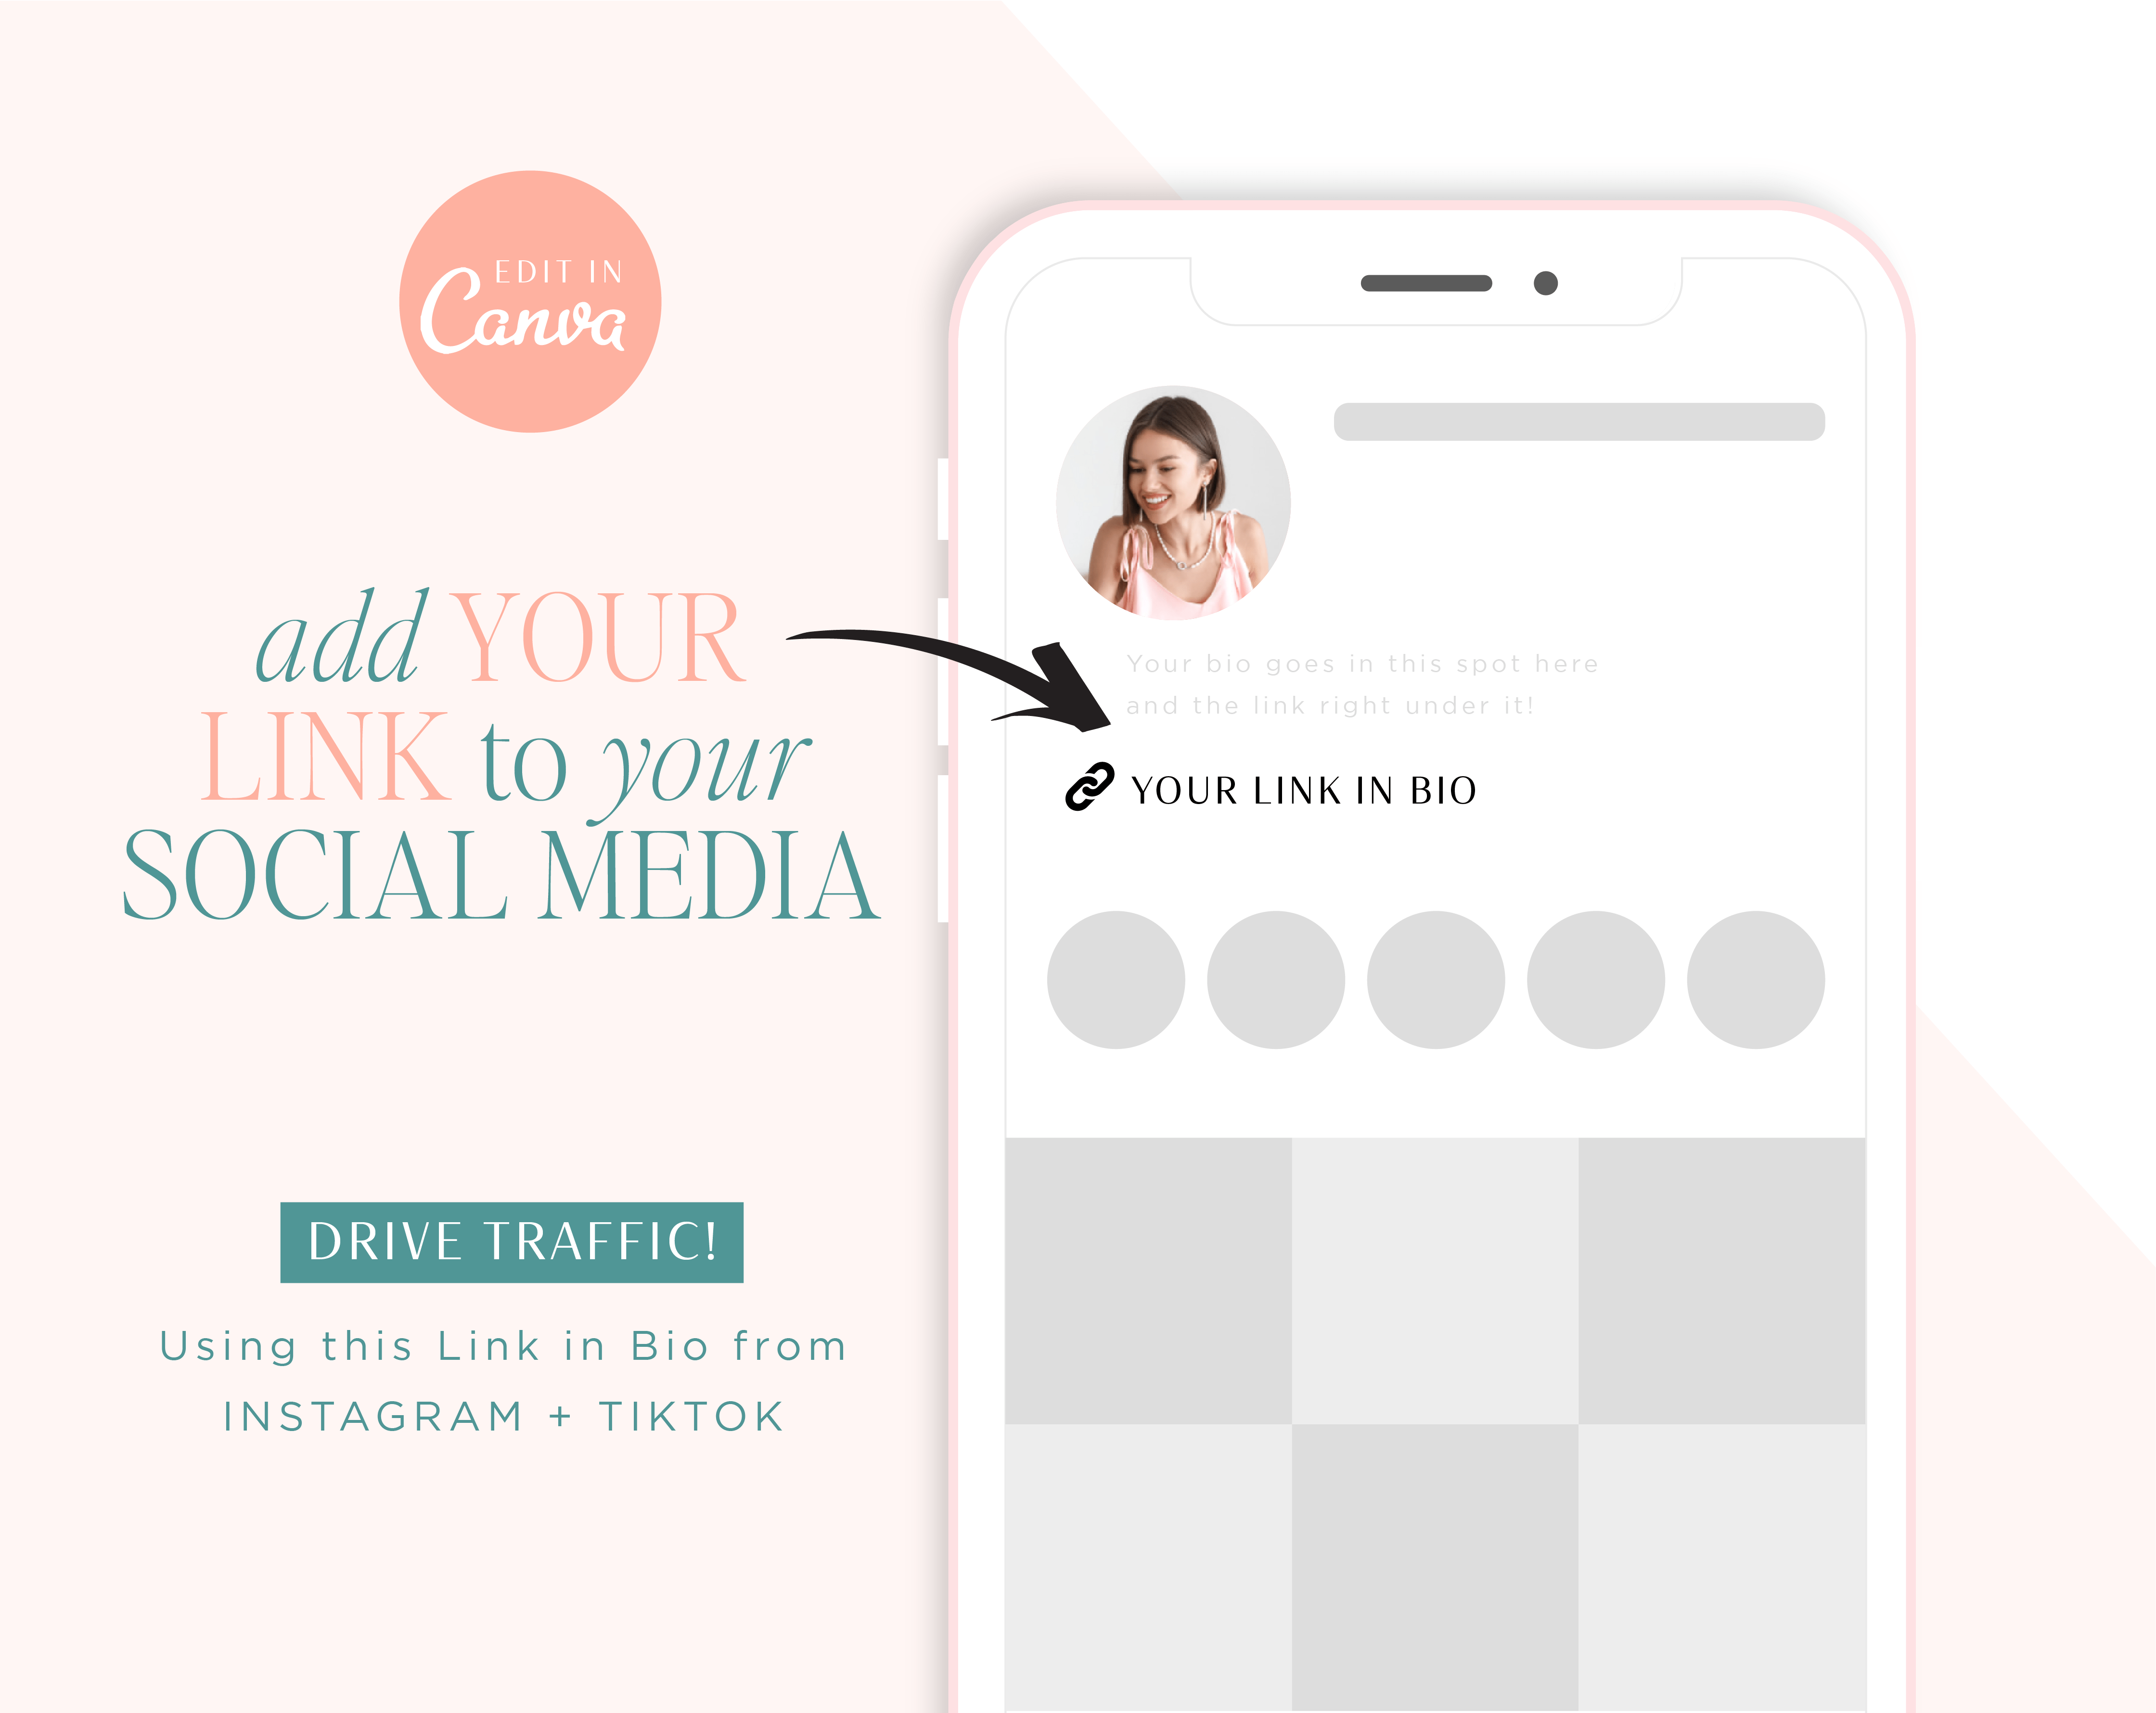 Retro Link in Bio Template editable in Canva. Style your Instagram and Tiktok with a custom landing page design for clicks to your website.